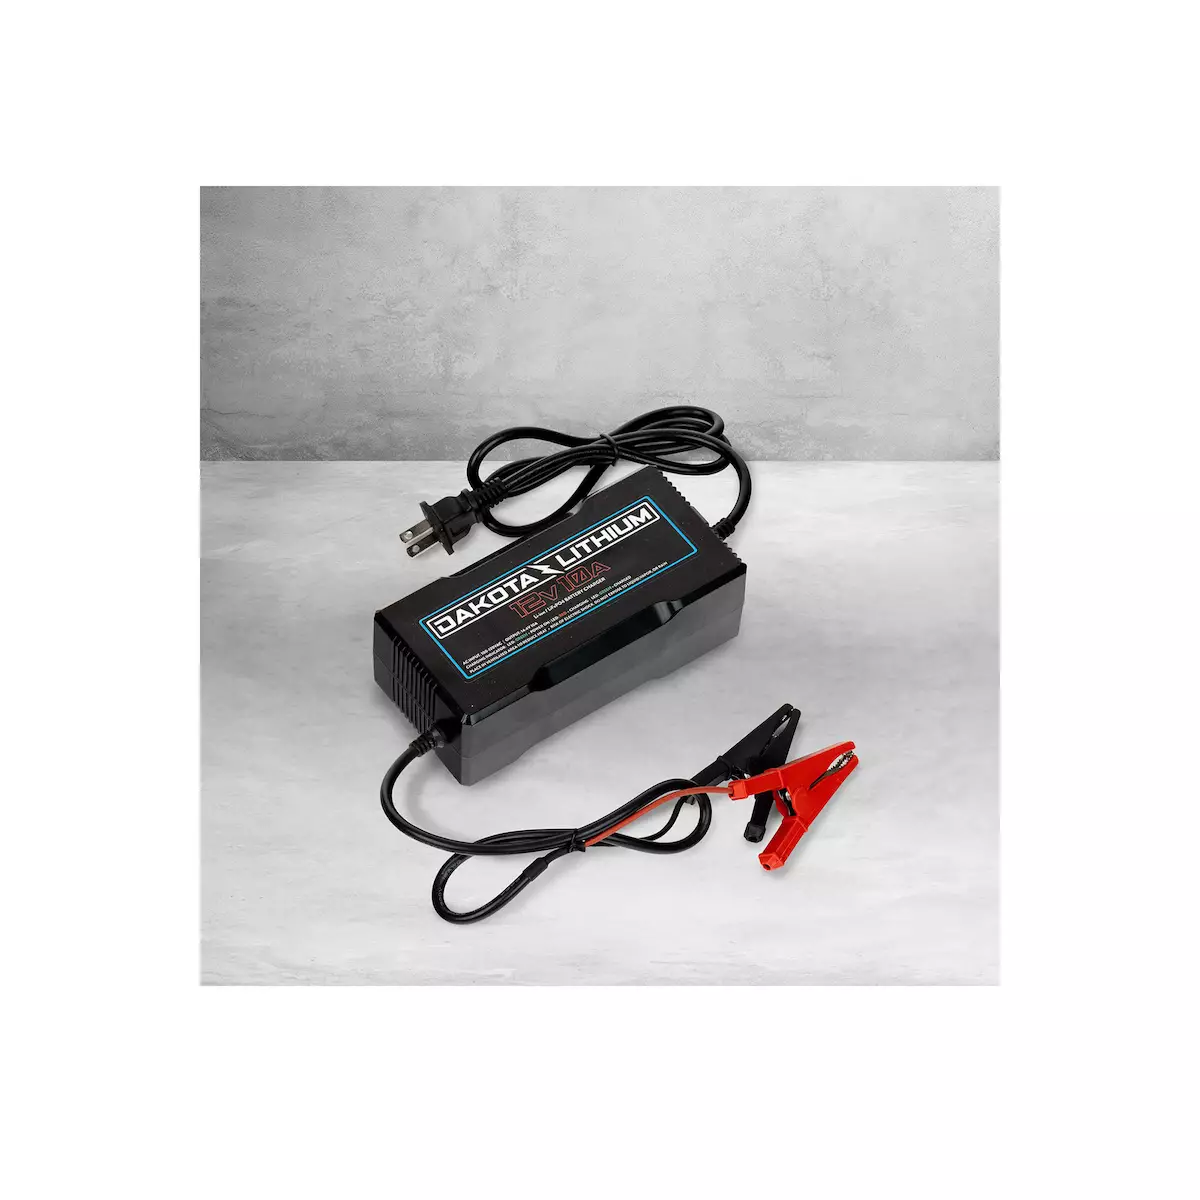 12V 10A LiFePO4 Lithium Iron Battery Charger